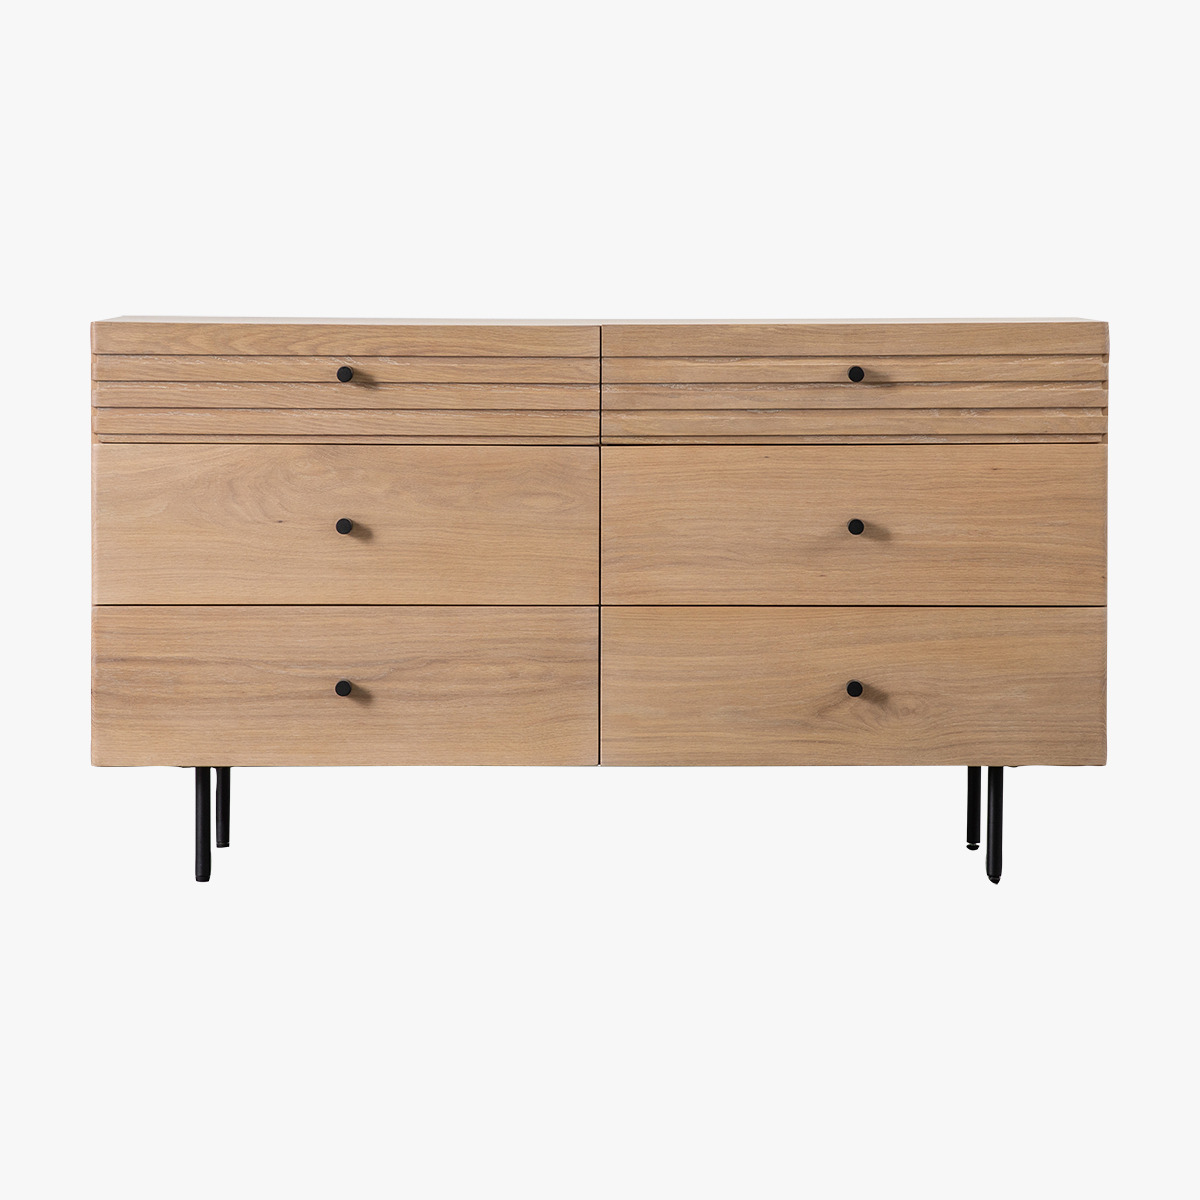 Groover Chest of Drawers